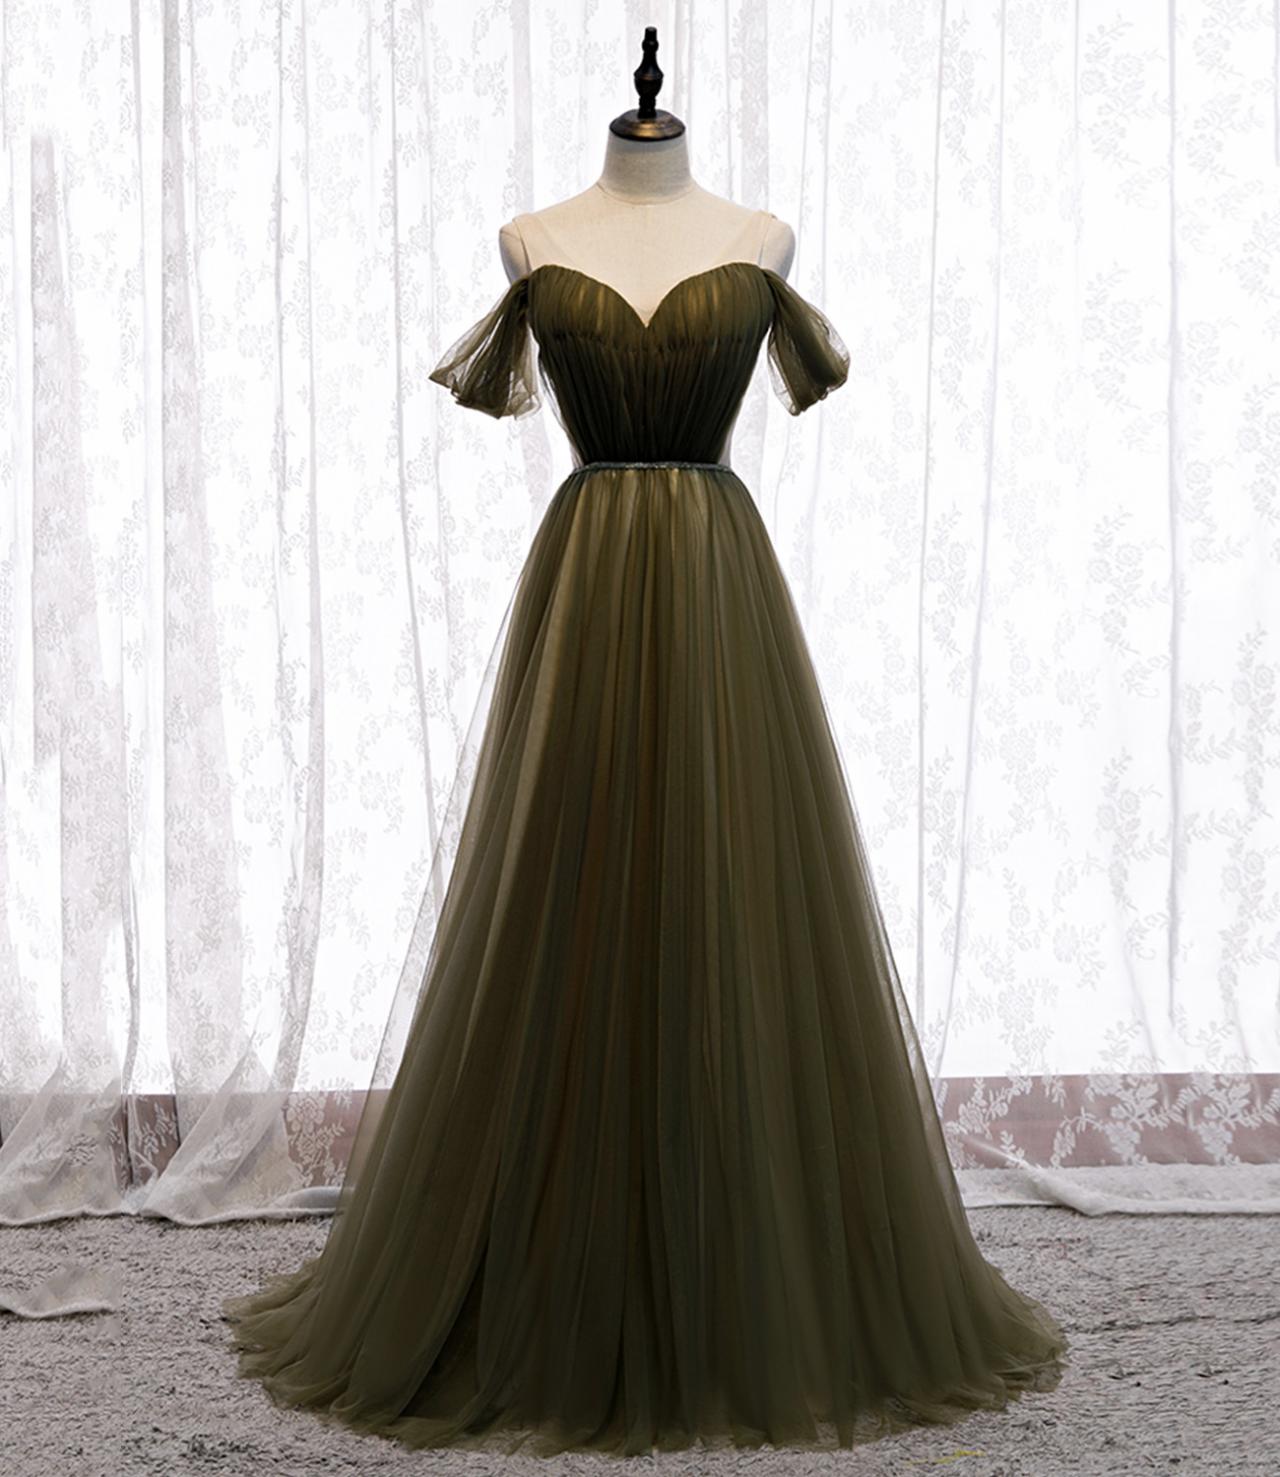 Elegant A Line V Neck Tulle Formal Prom Dress, Beautiful Long Prom Dress, Banquet Party Dress